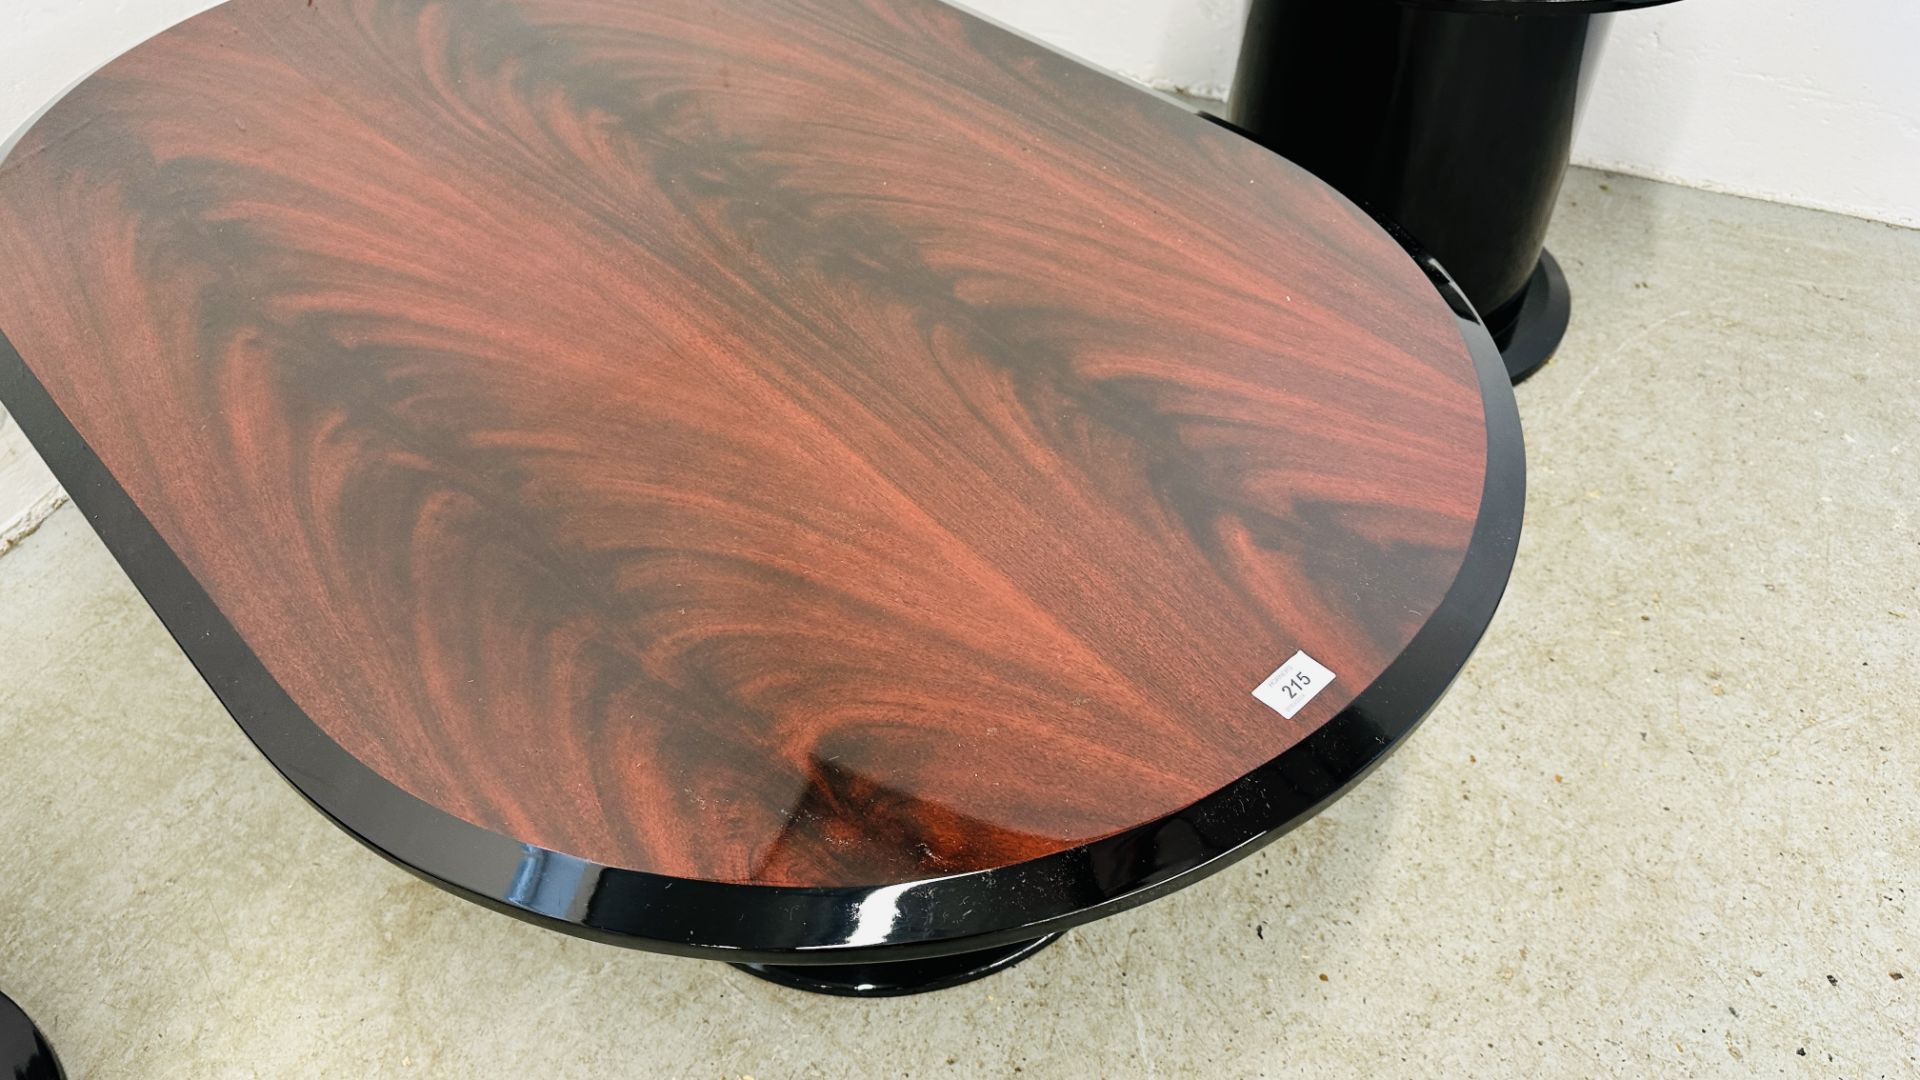 3 MATCHING DESIGN HIGH GLOSS MAHOGANY FINISH COFFEE TABLES INCLUDING A PAIR OF CIRCULAR AND 1 OVAL. - Image 16 of 16